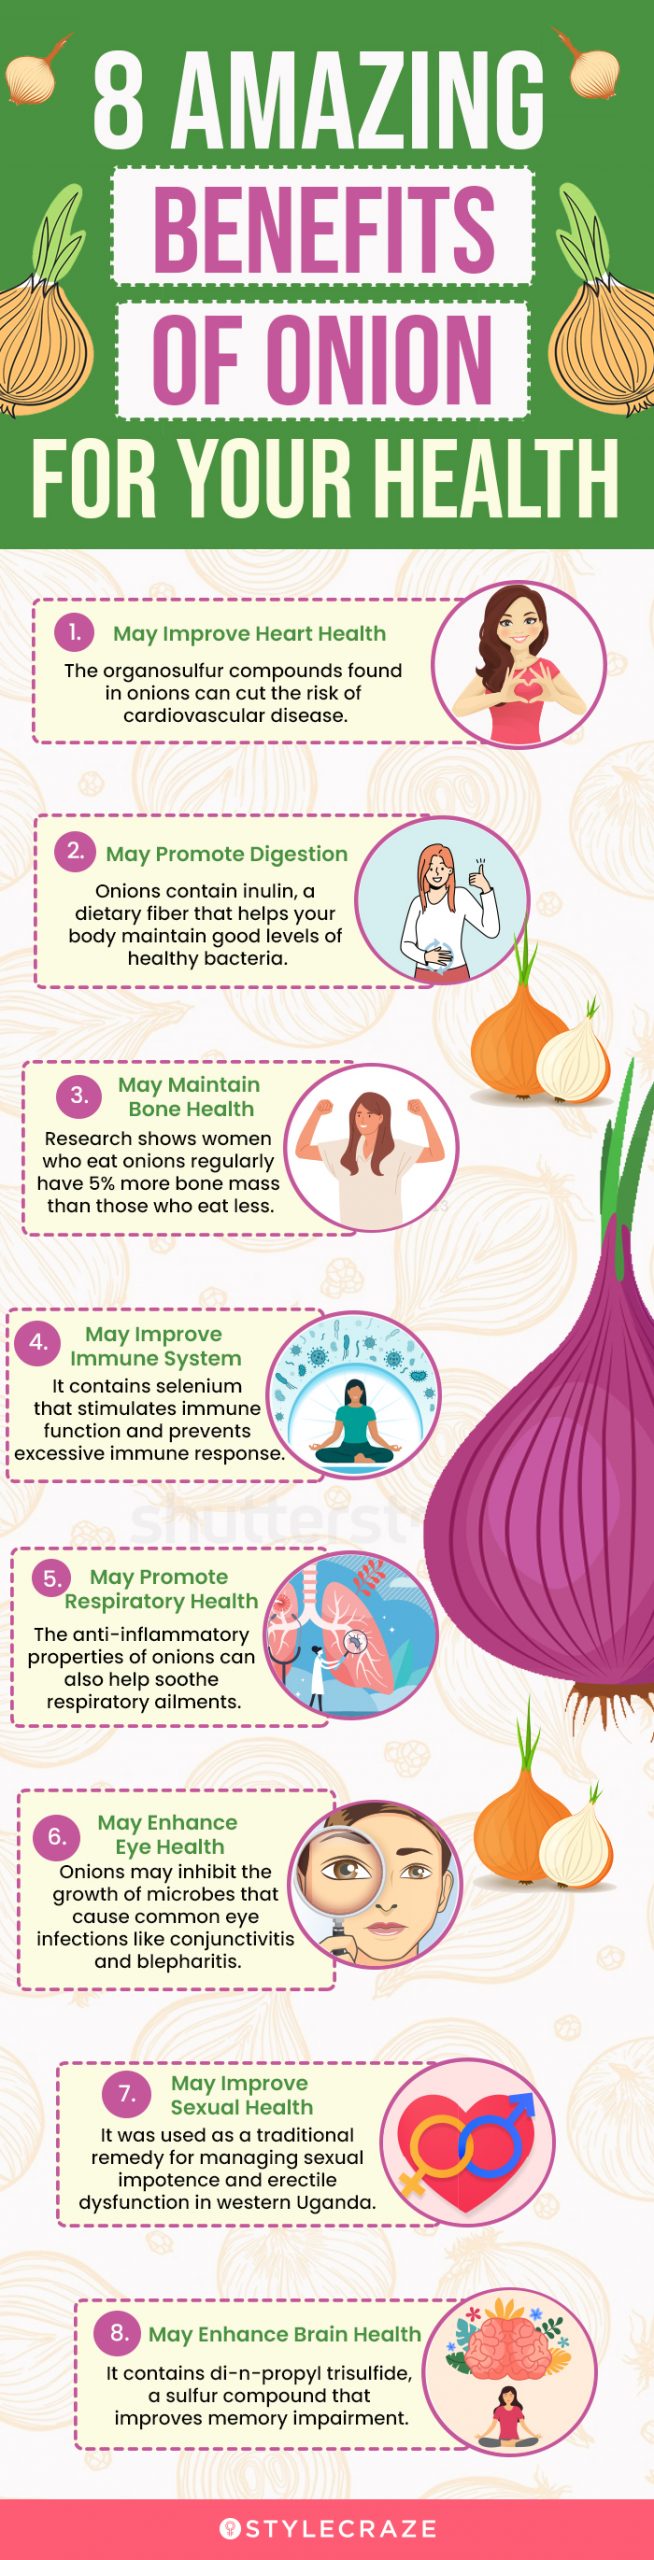 8 amazing benefits of onion for your health (infographic)